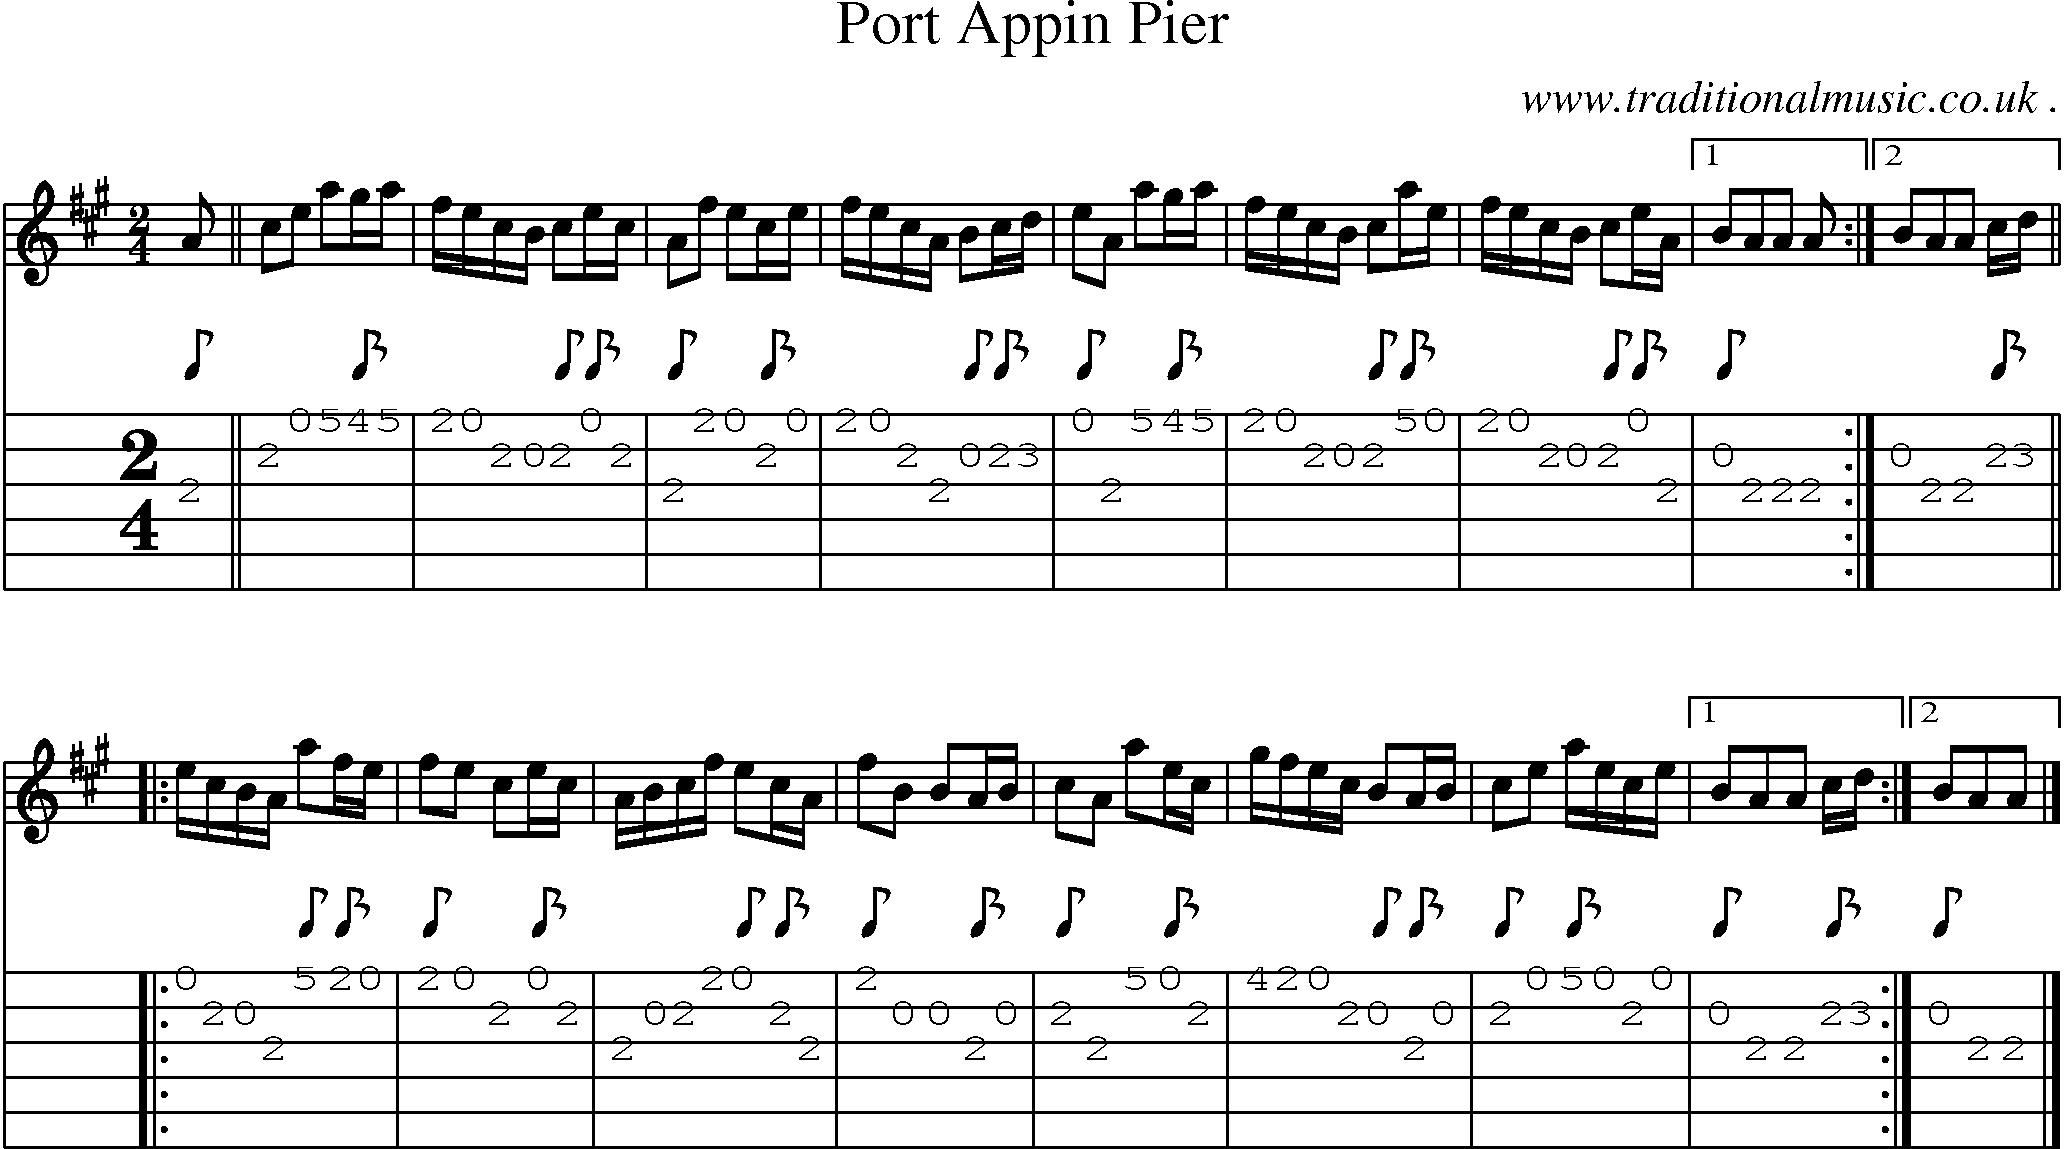 Sheet-music  score, Chords and Guitar Tabs for Port Appin Pier